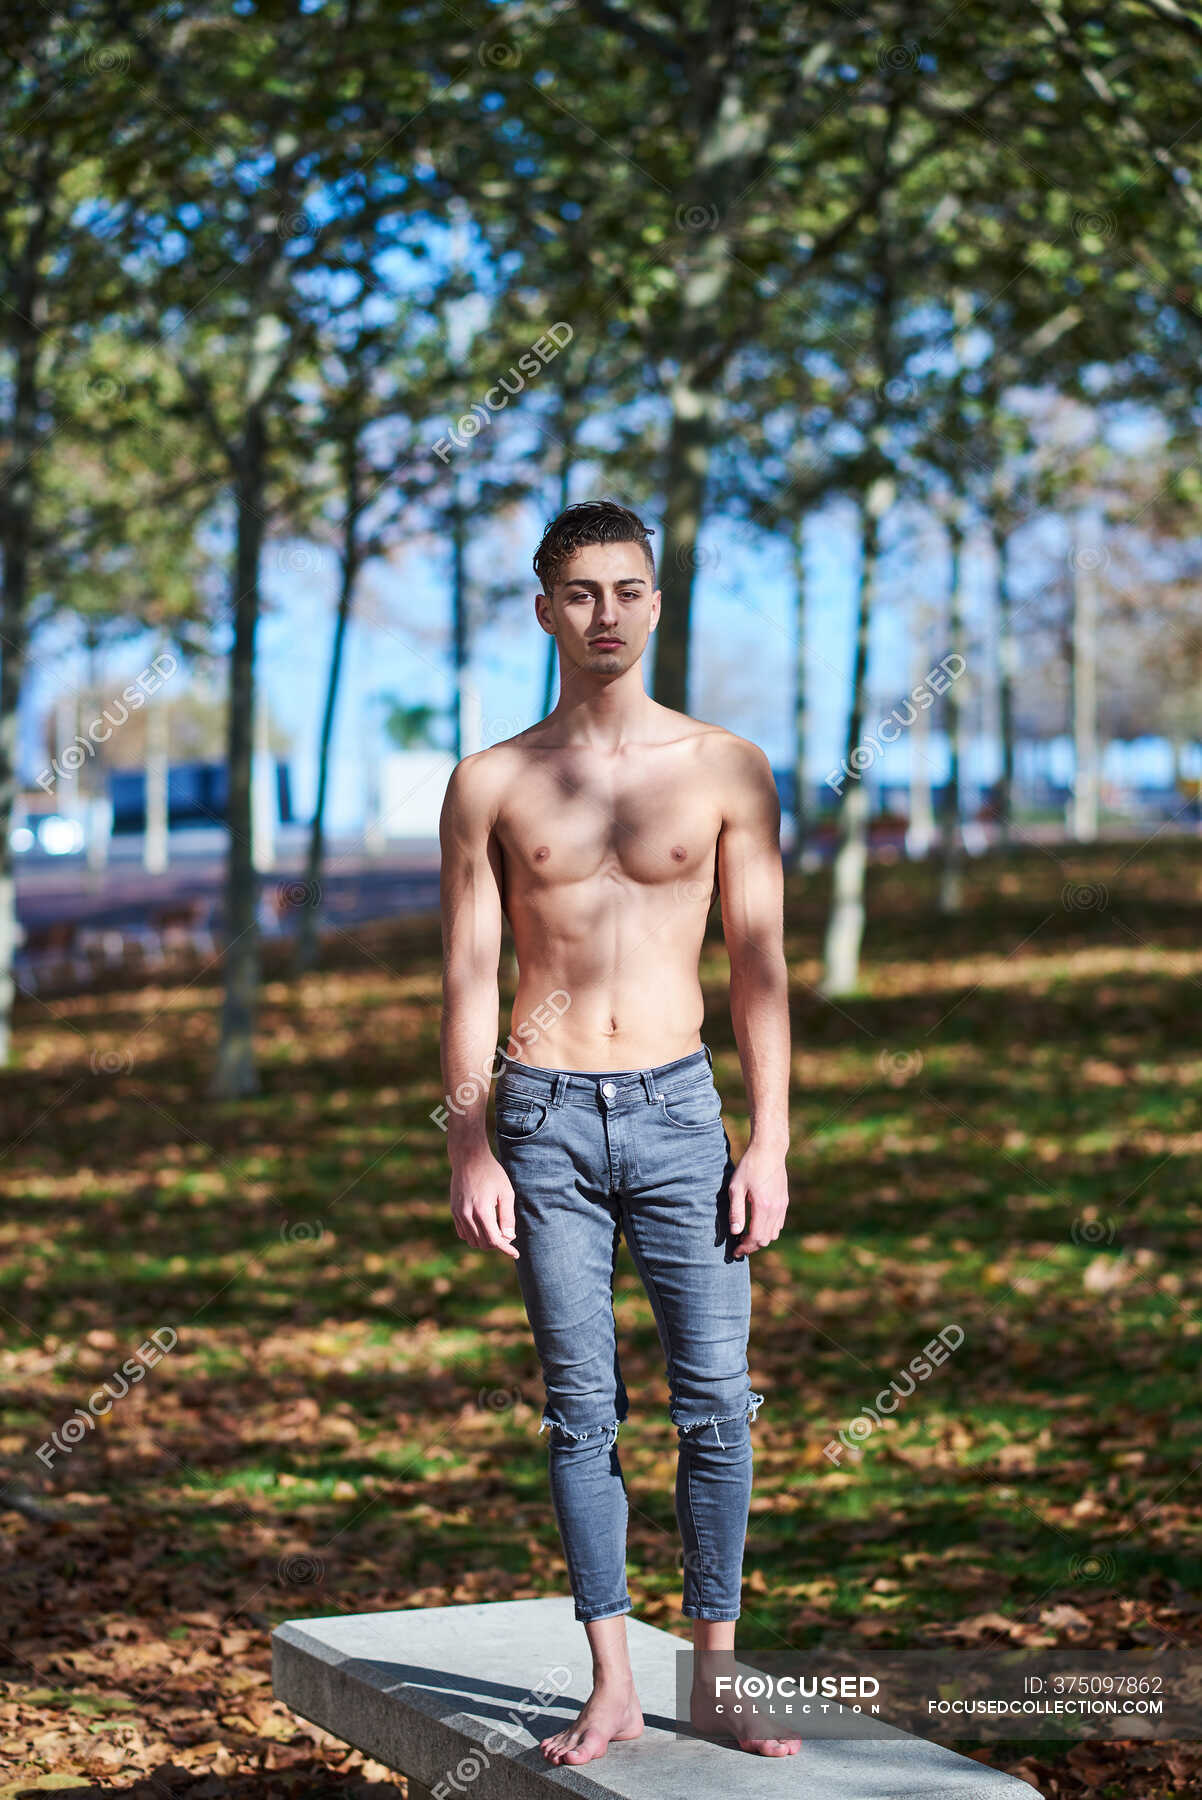 Full Body Shirtless Male Athlete In Ripped Jeans Standing On Concrete Bench And Looking At